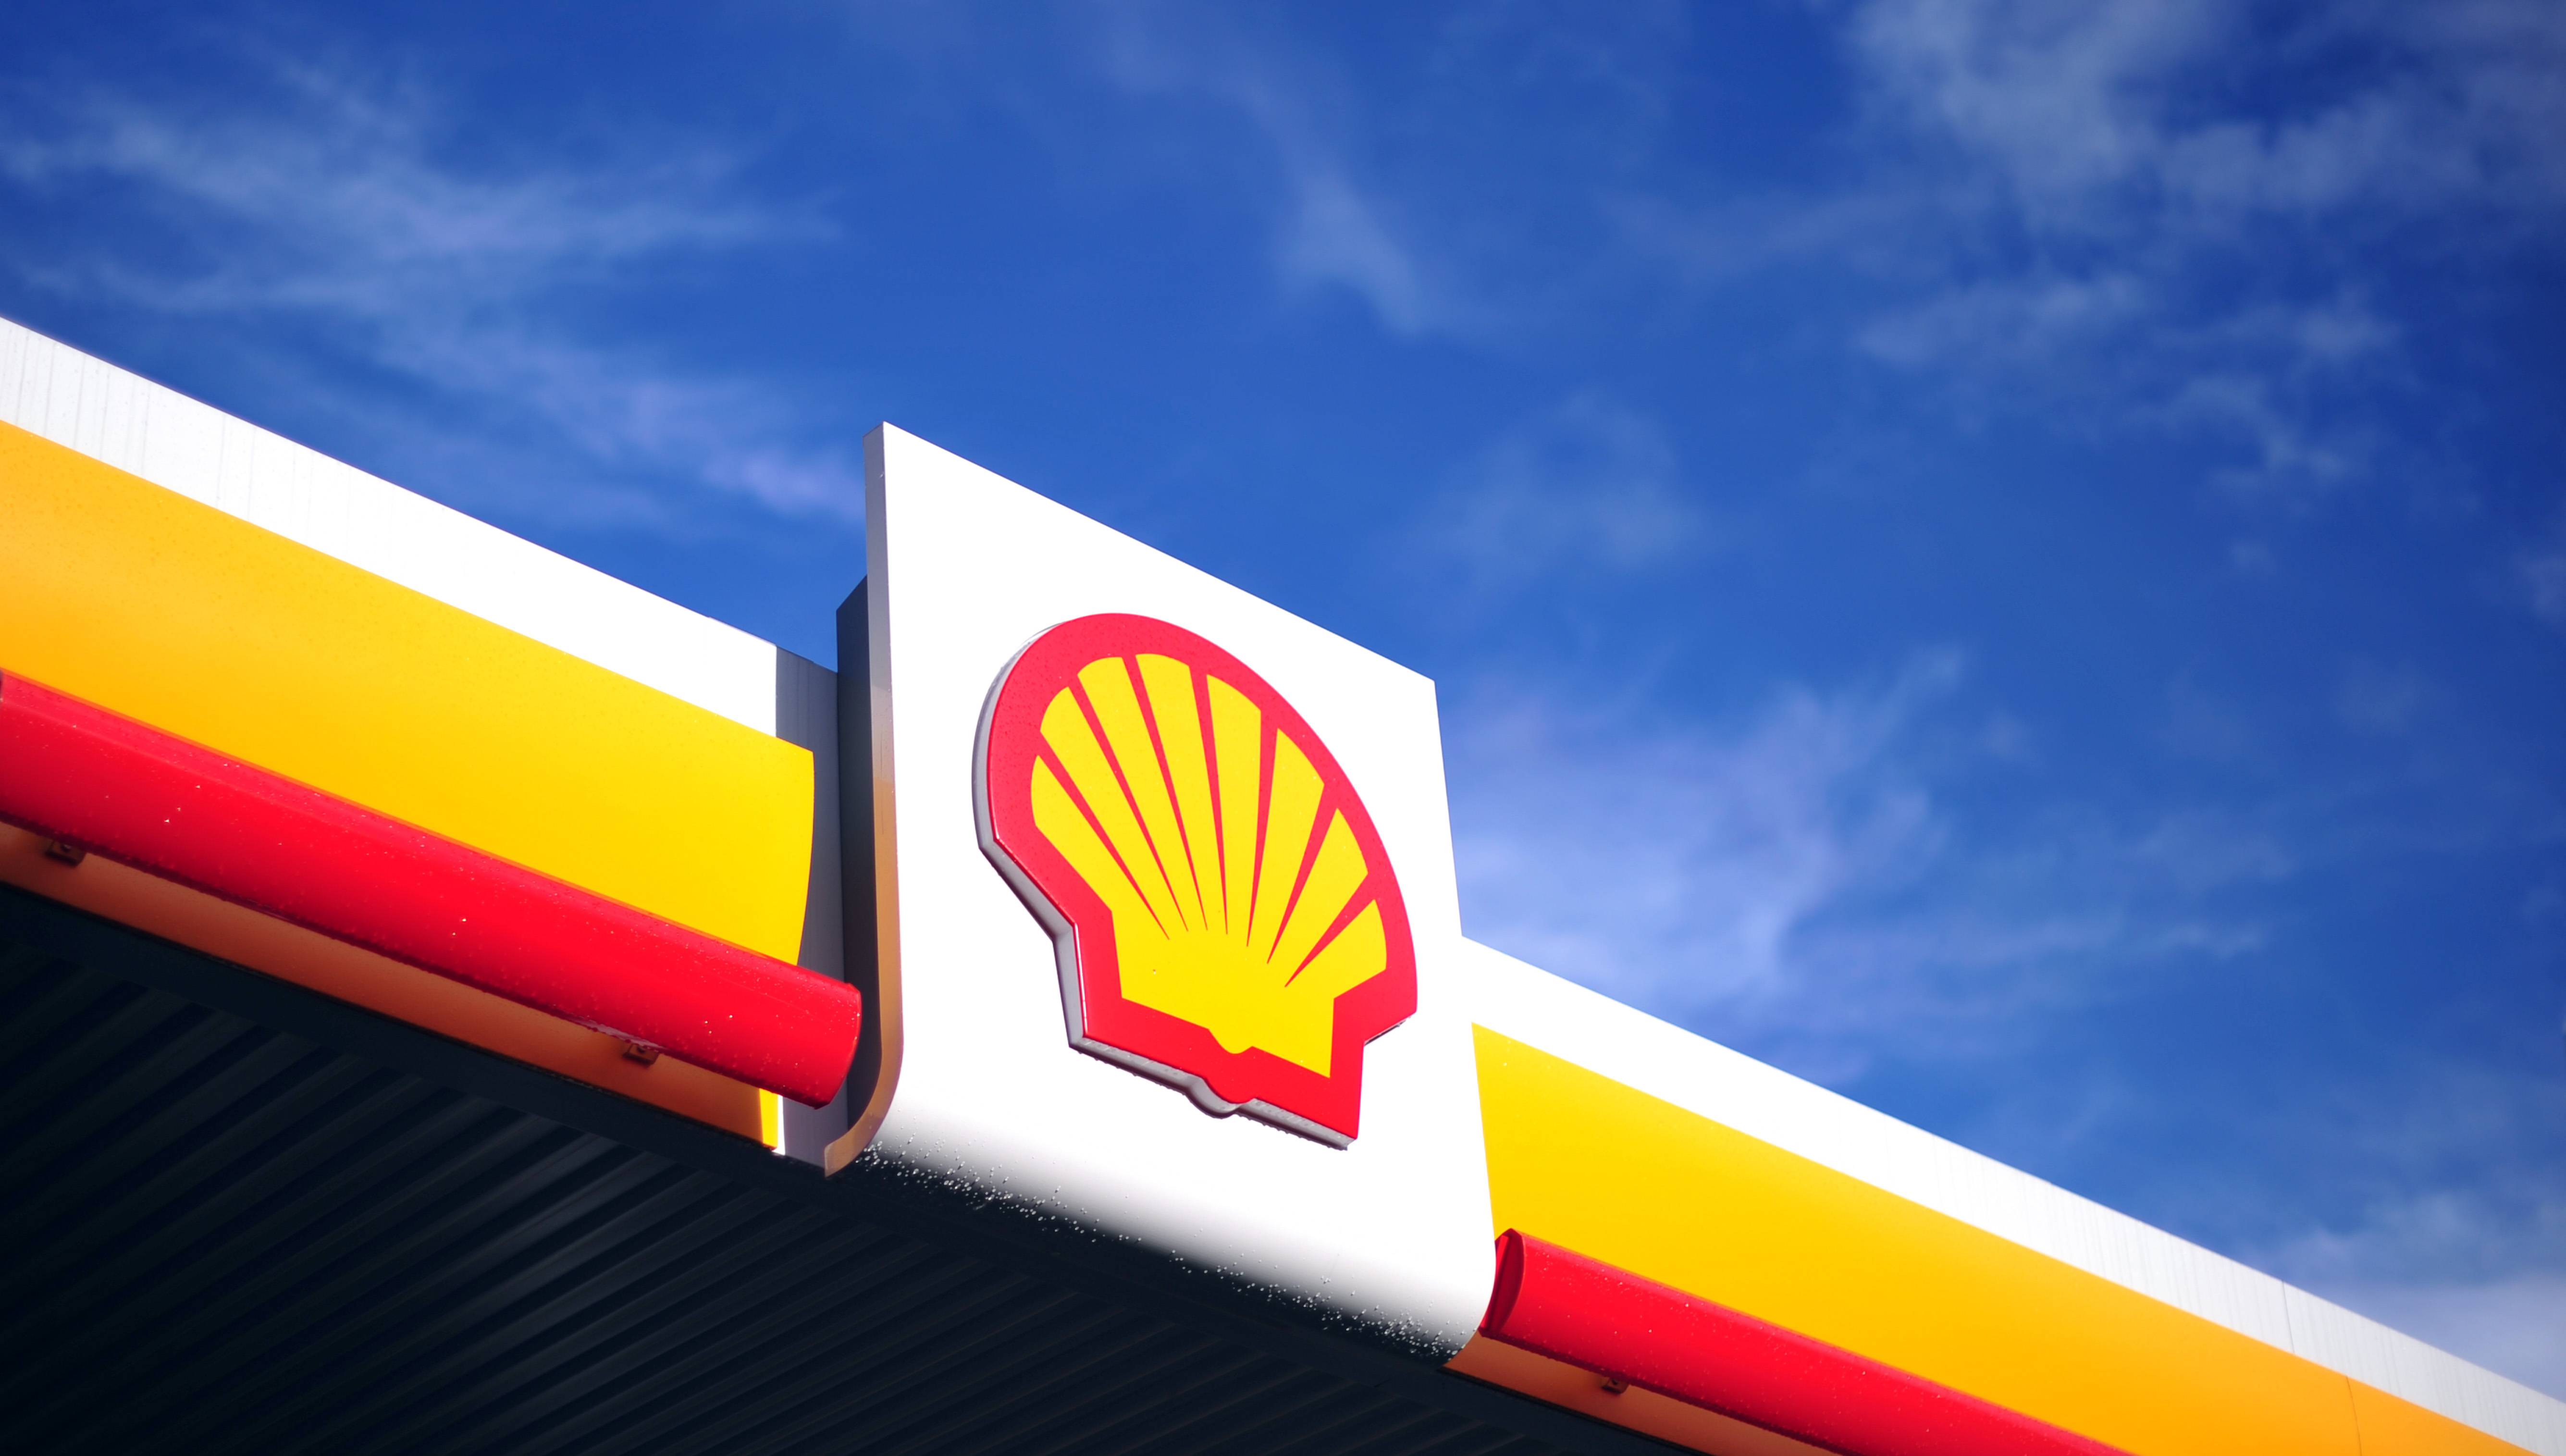 Shell Cutting 6,500 Jobs, Sees Prolonged Industry Downturn | Fortune